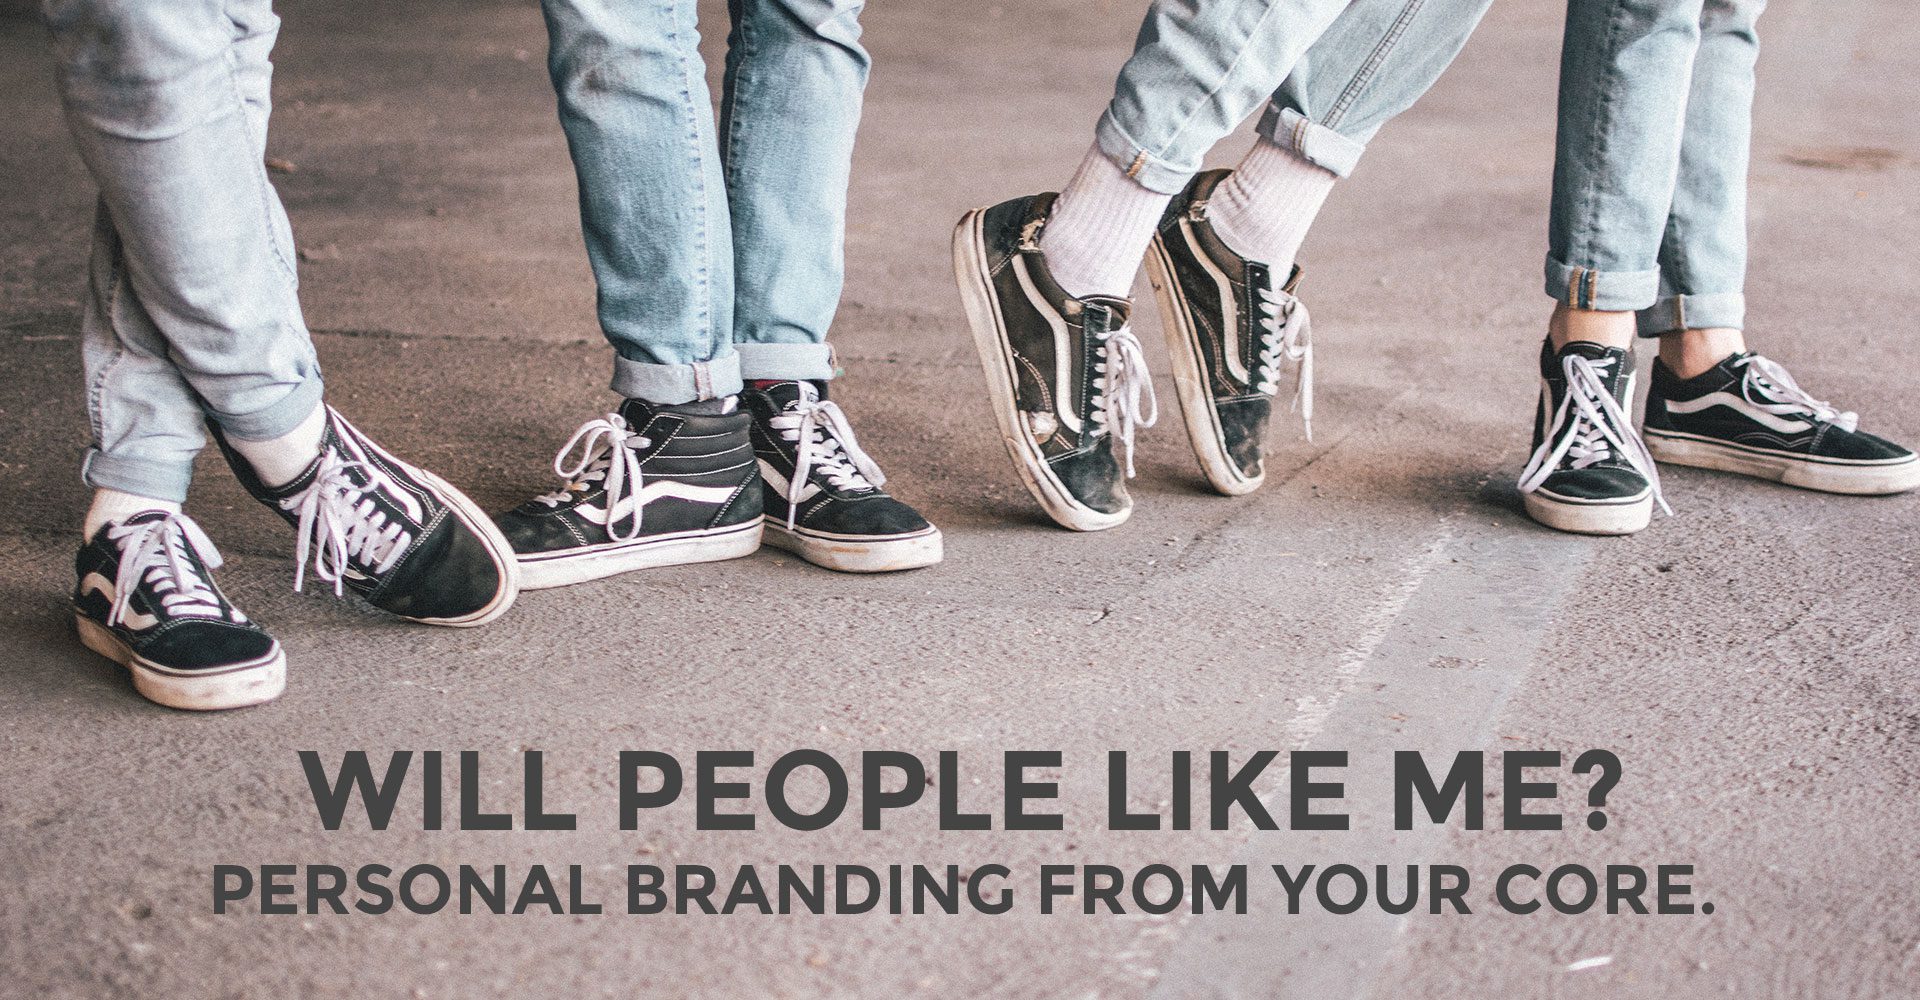 personal branding from your core